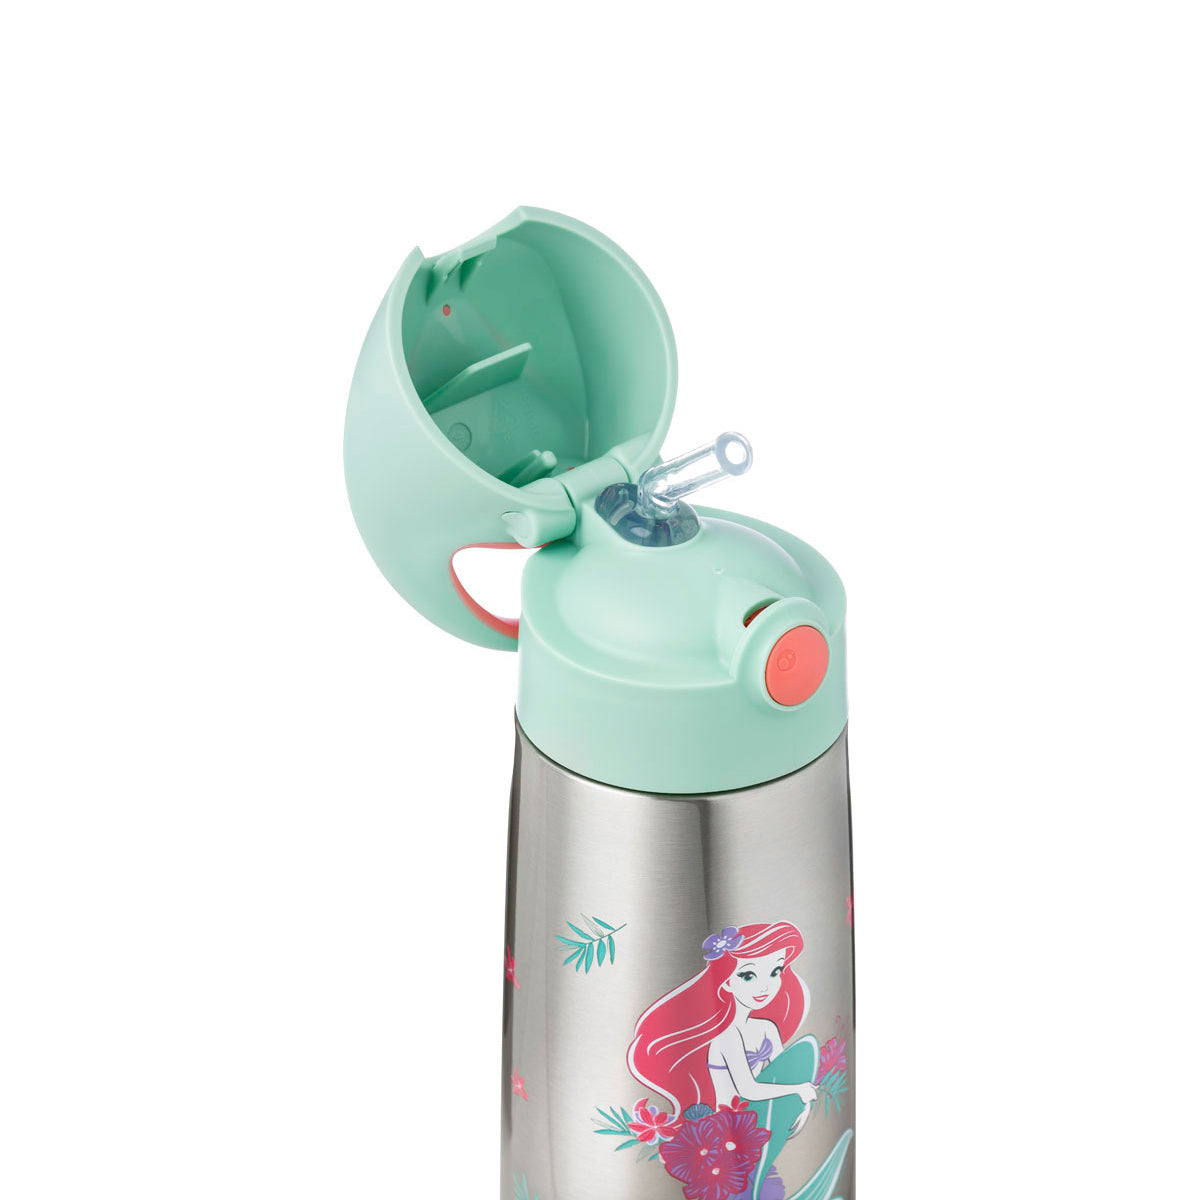 The Little Mermaid insulated drink bottle